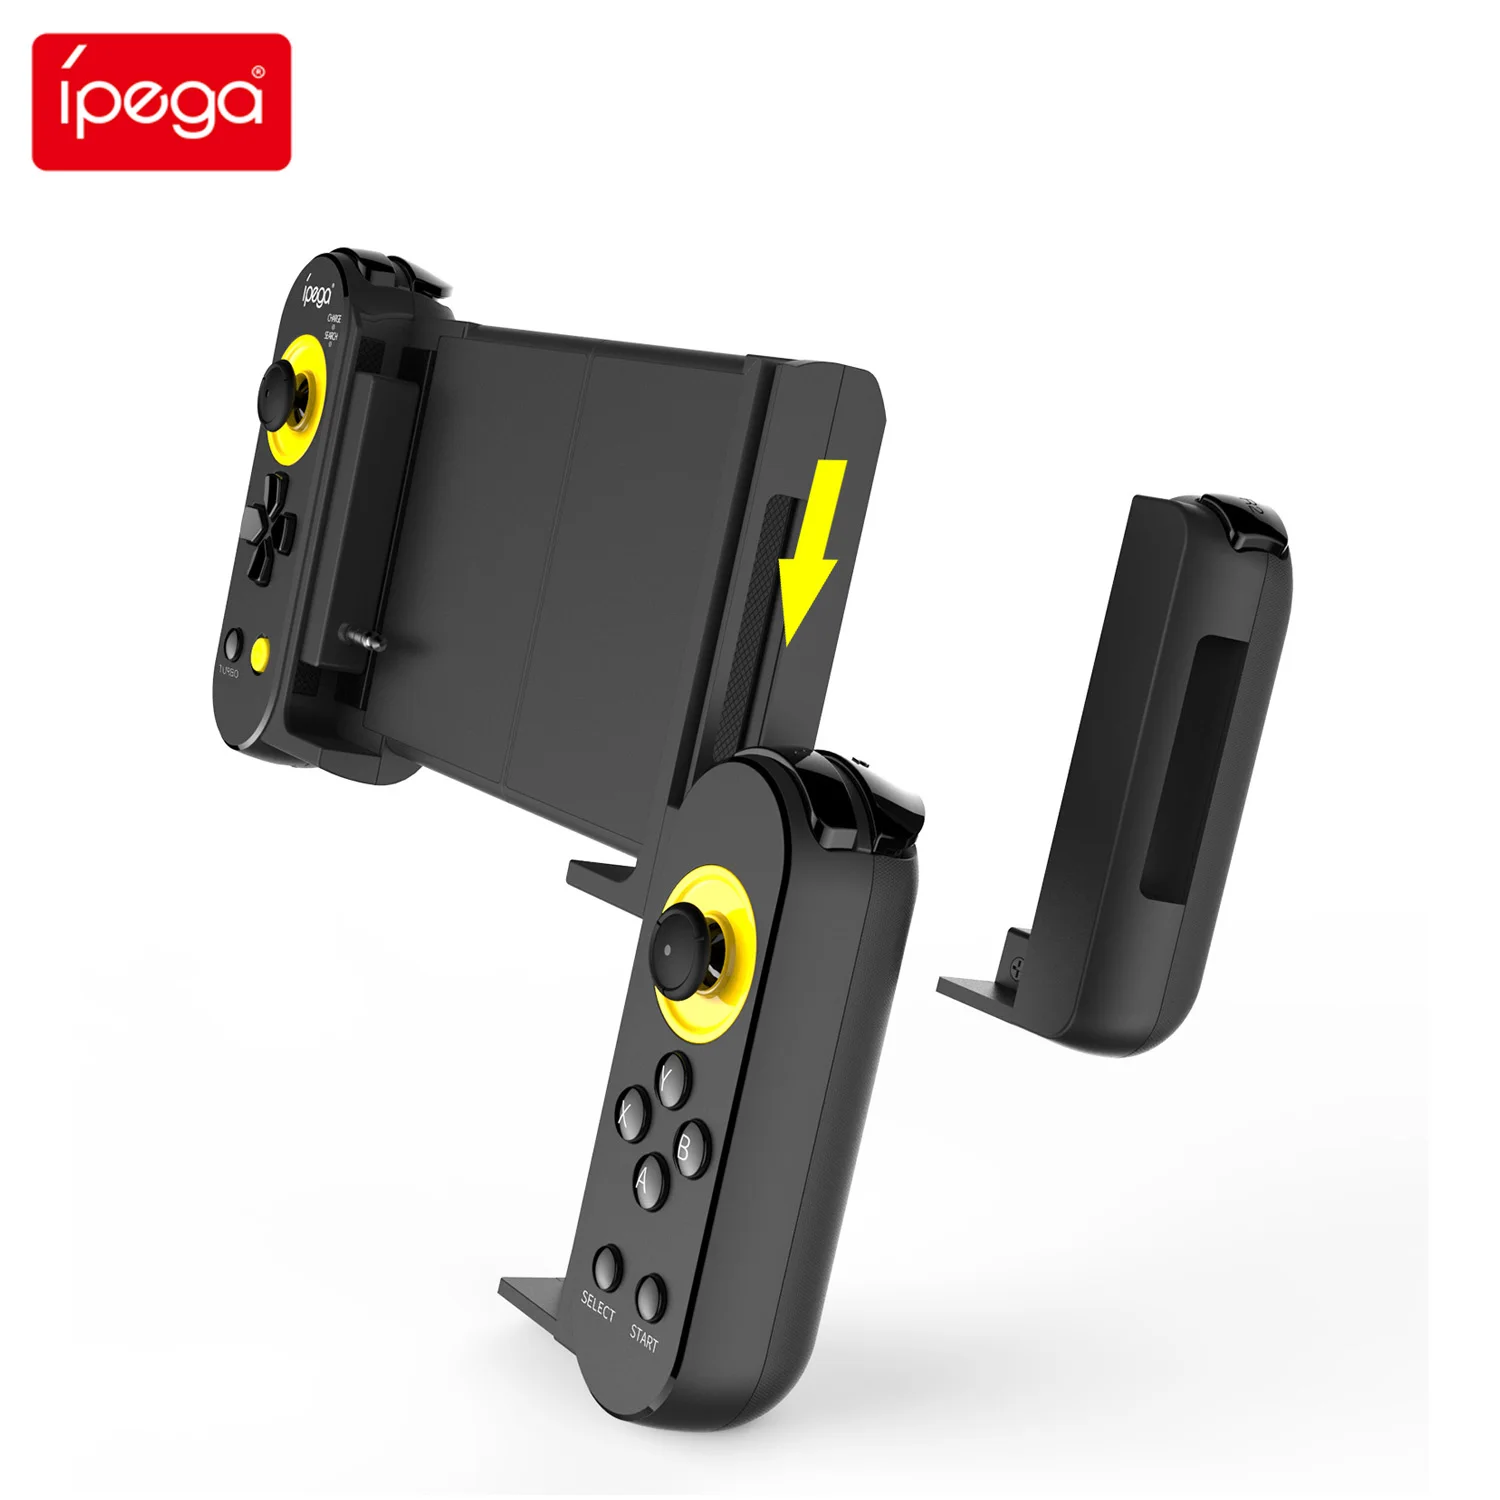 

IPEGA-Wireless 4.0 mobile game controller joystick is suitable for iOS/Android smartphone tablet gamepad